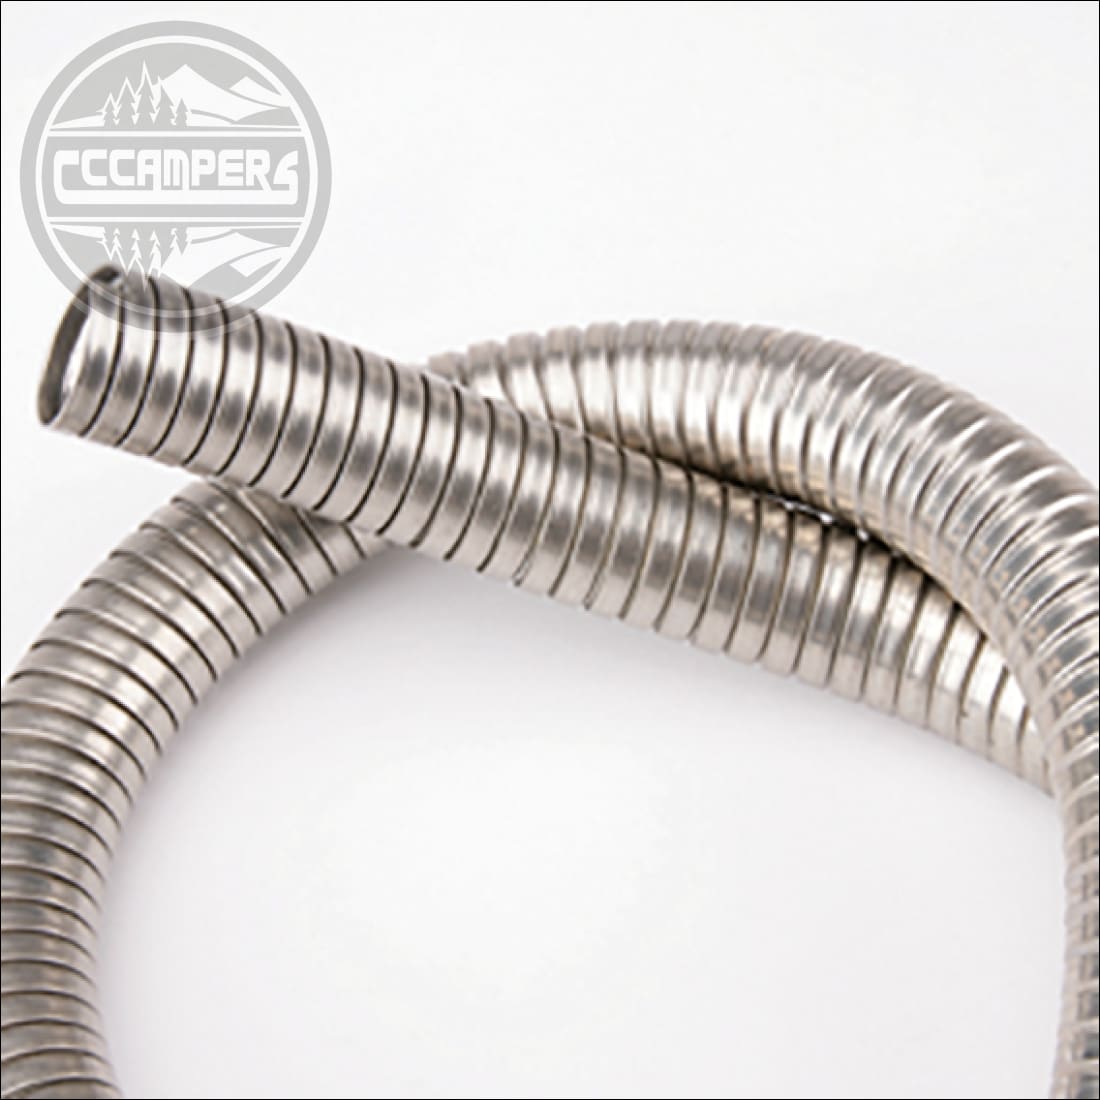 24mm - 25mm ID Eberspacher Heat Source Propex Flexible Exhaust Excellent Quality - cccampers.myshopify.com